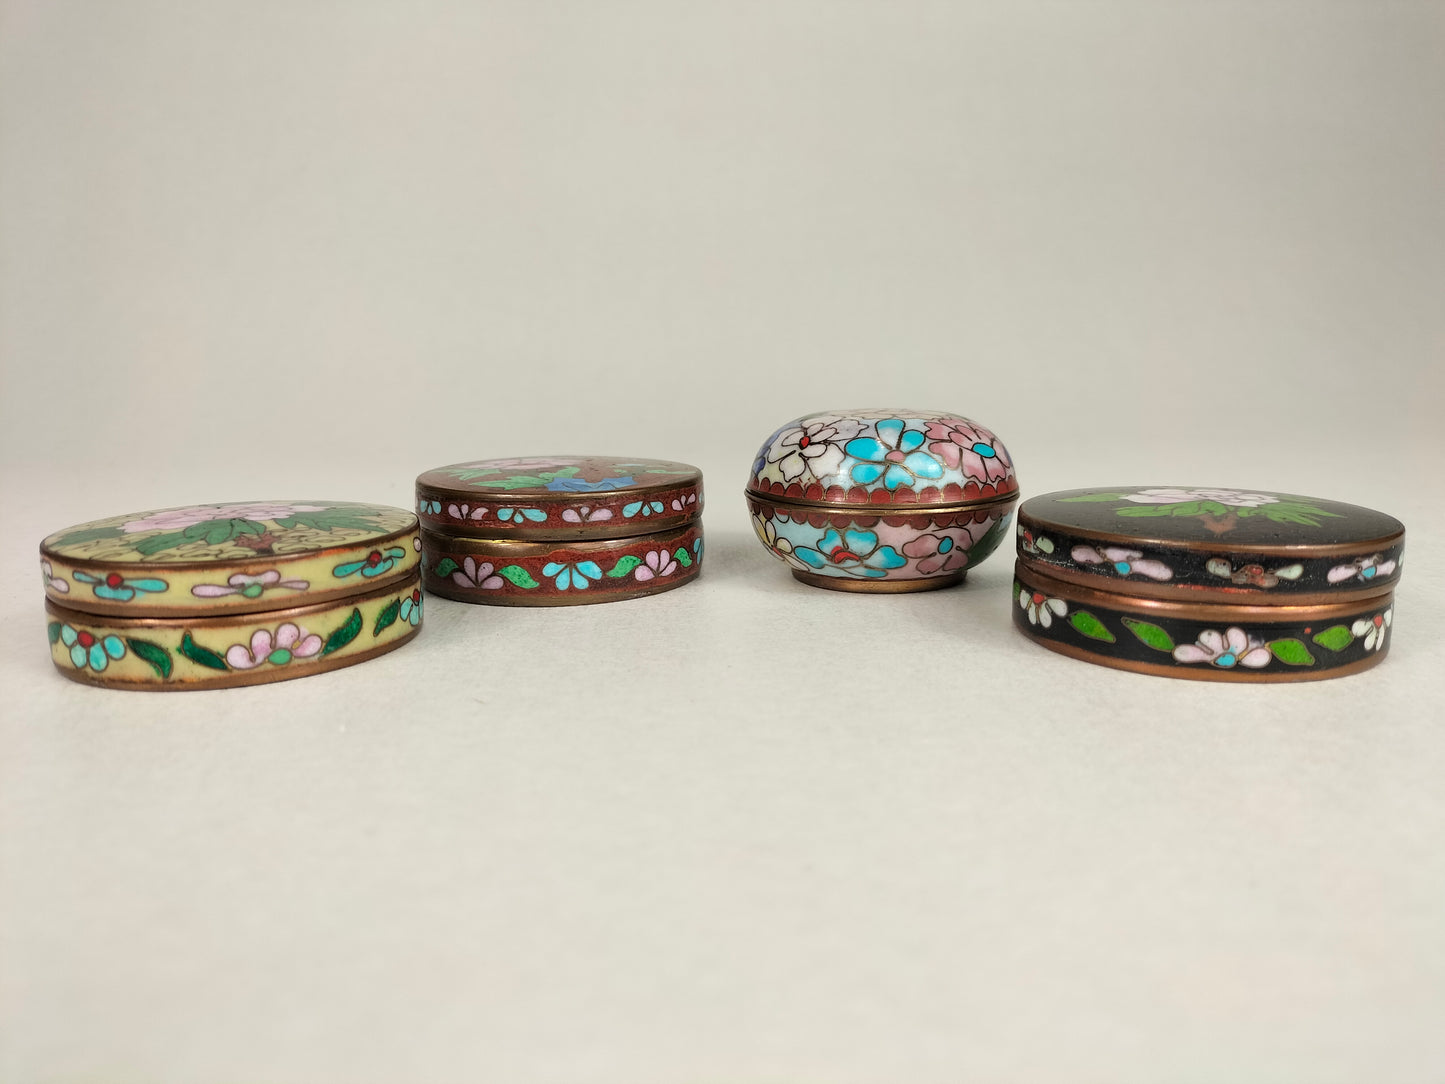 A set of 4 Chinese cloisonne jewelry boxes decorated with floral motifs // 20th century